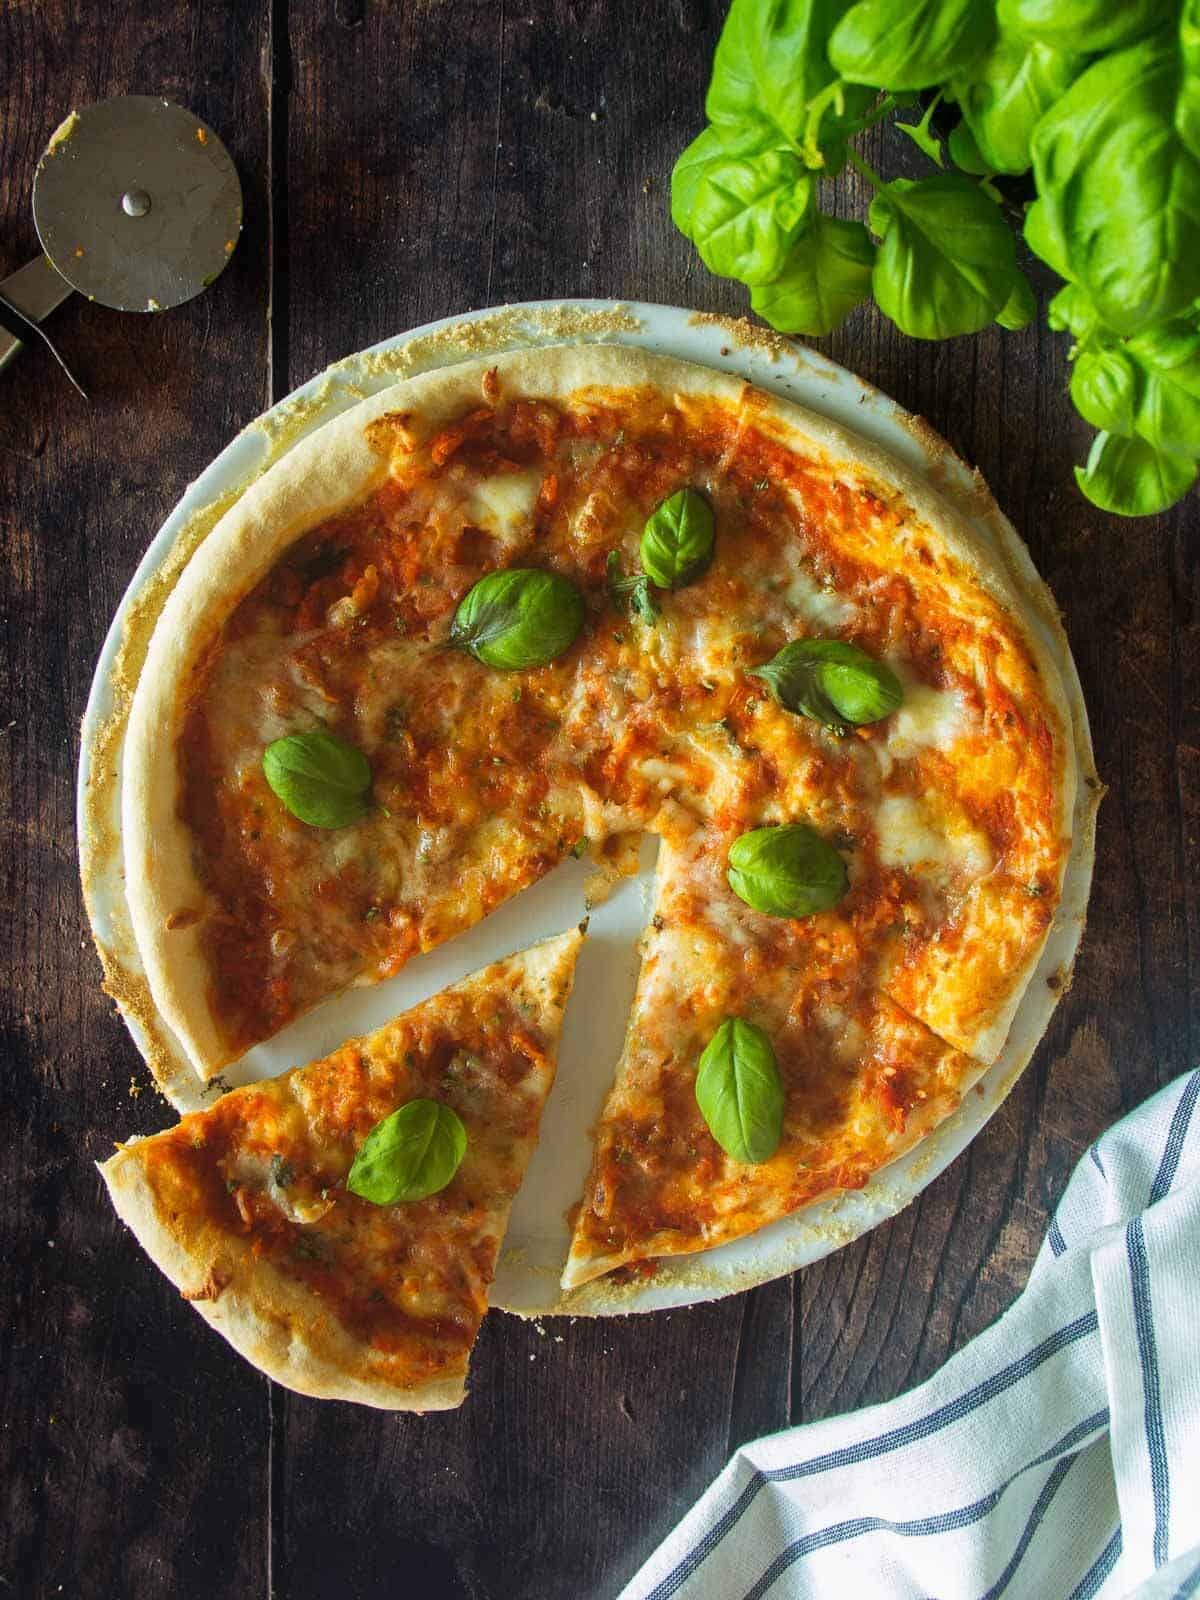 vegan cheese pizza made with our vegan pizza dough recipe and topped with fresh basil and vegan mozzarella.